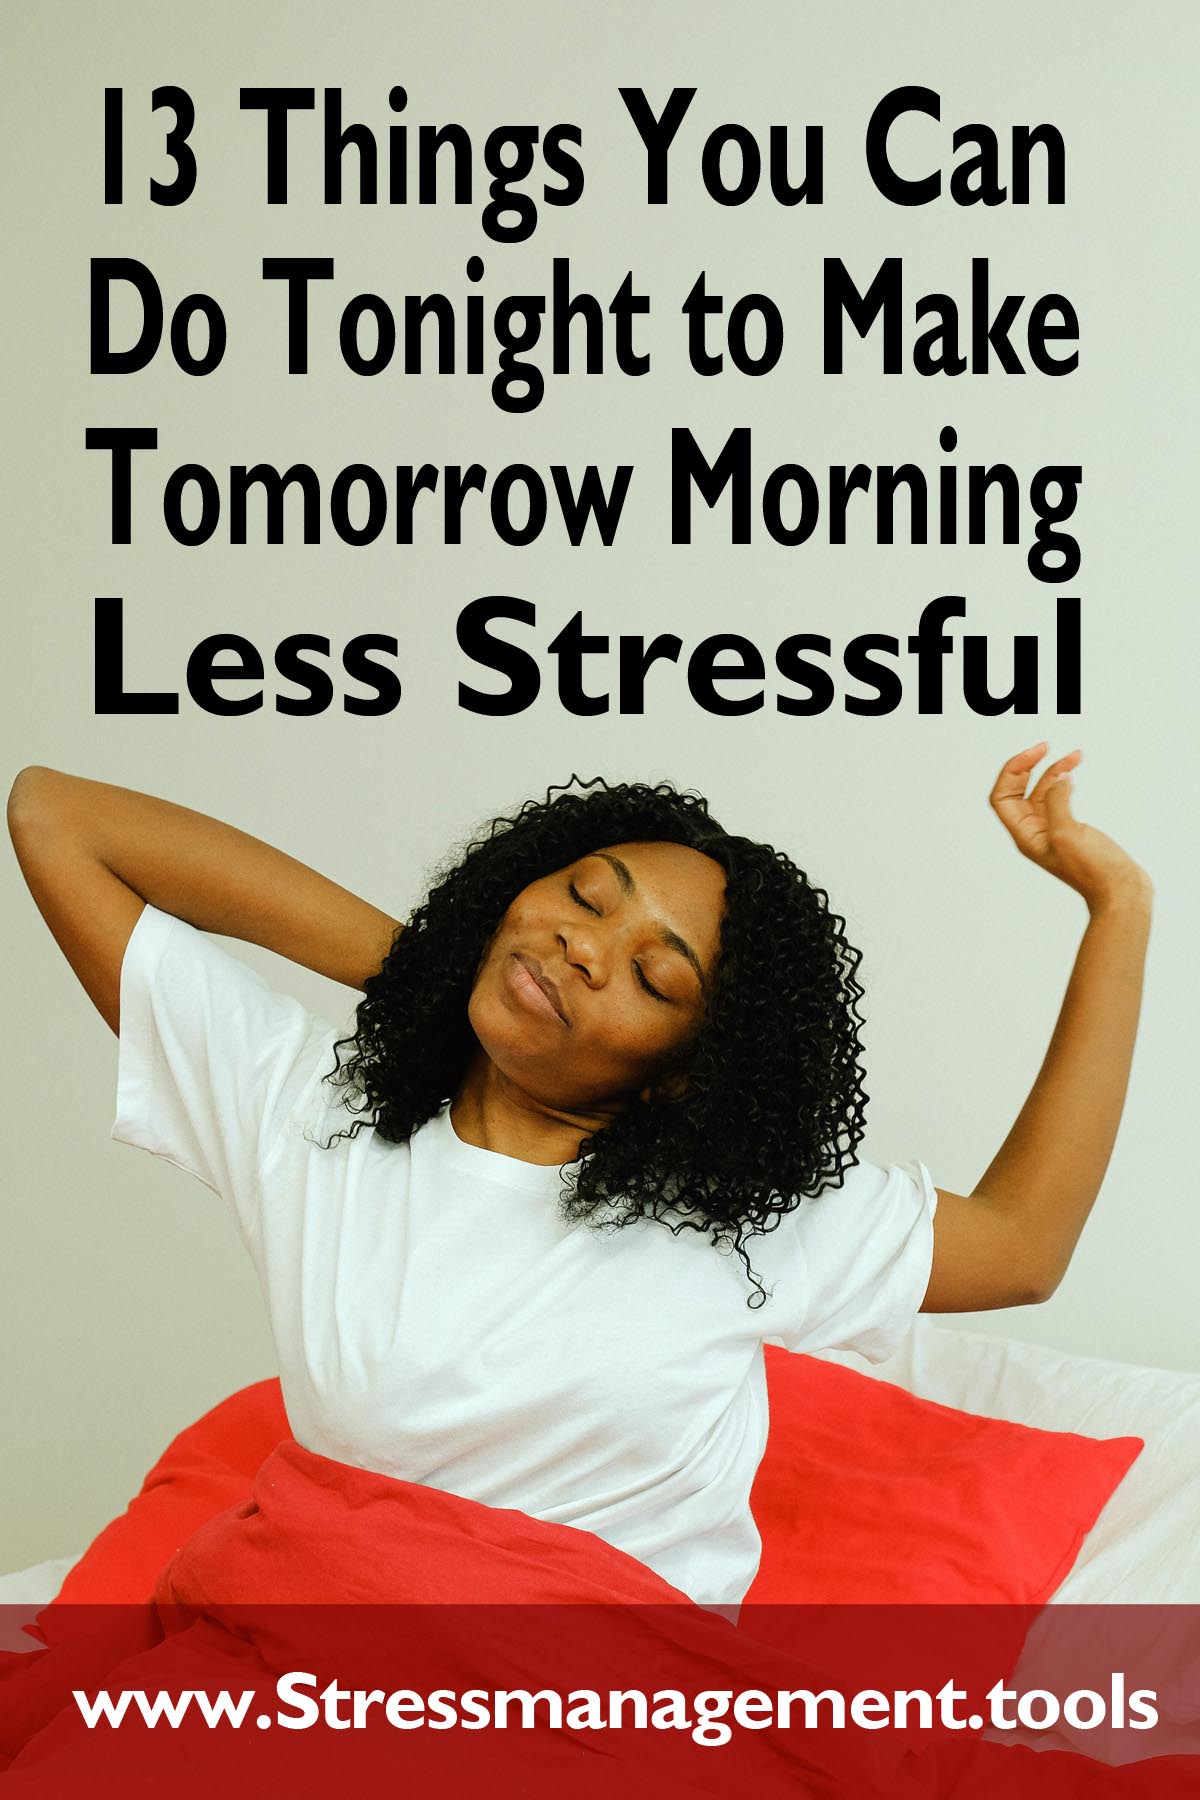 13 Things You Can Do Tonight to Make Tomorrow Morning Less Stressful